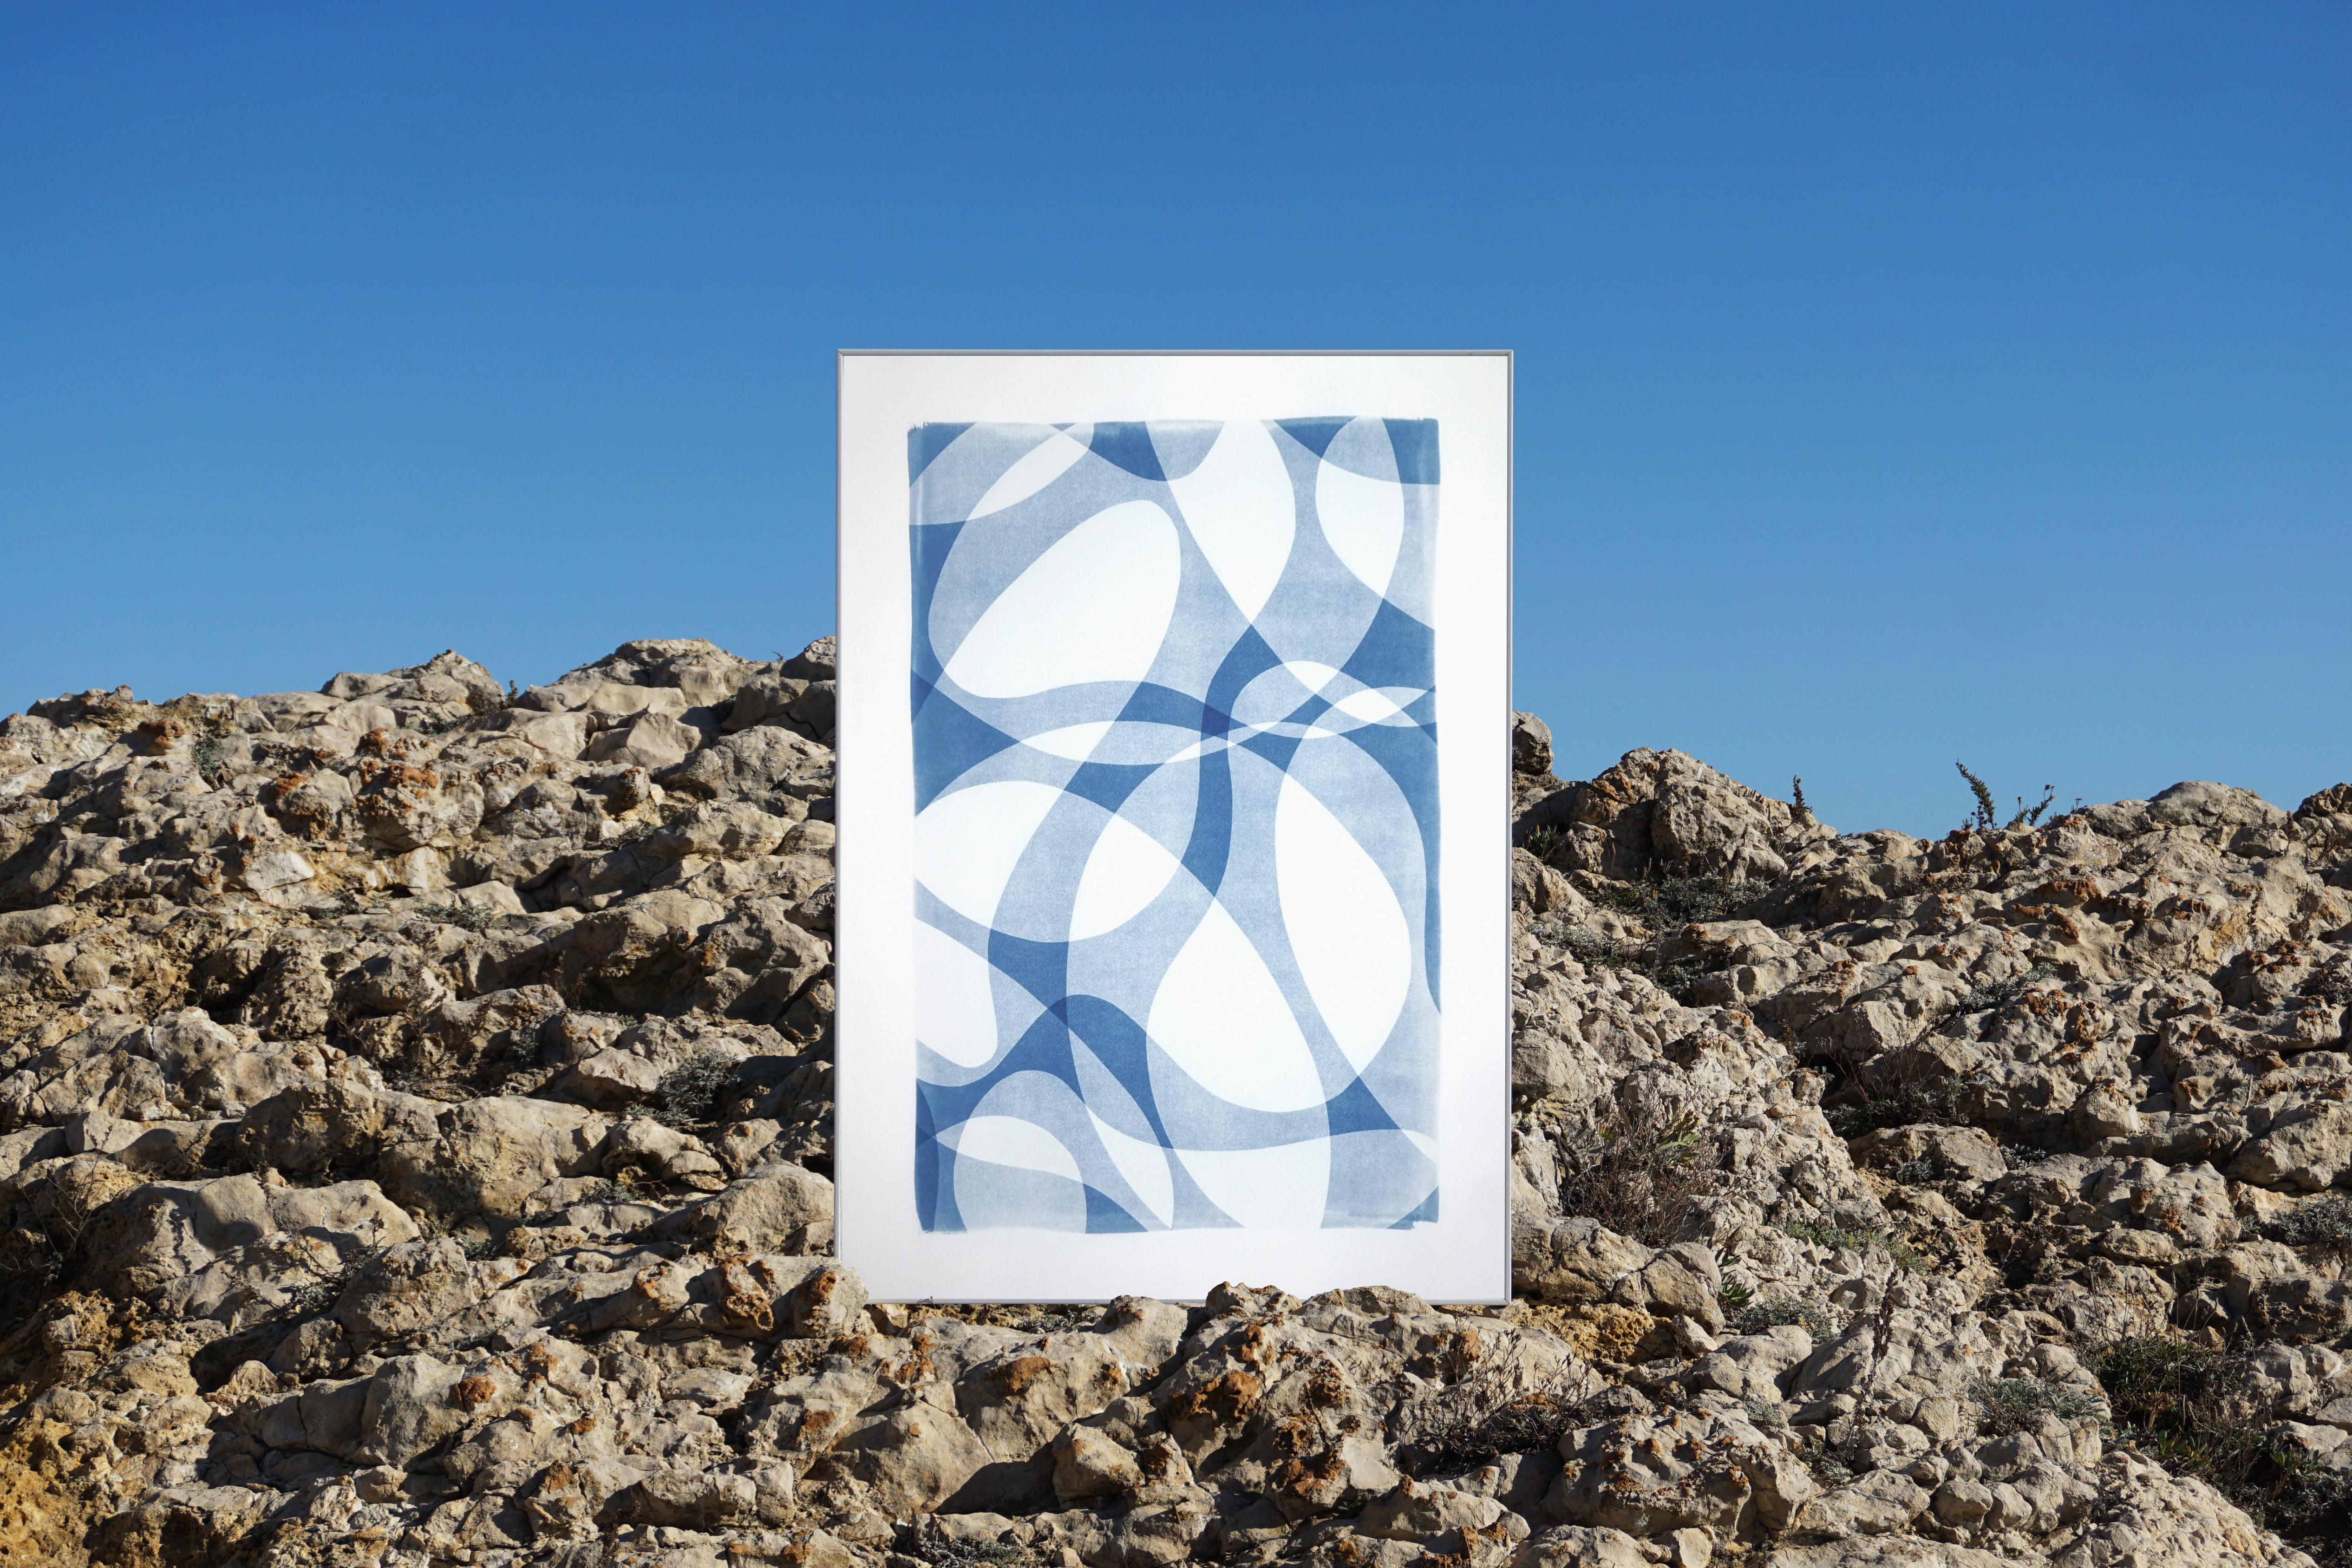 Vertical Monotype, Contours & Shades, Blue & White, Cutouts Mid-Century Modern   - Abstract Print by Kind of Cyan